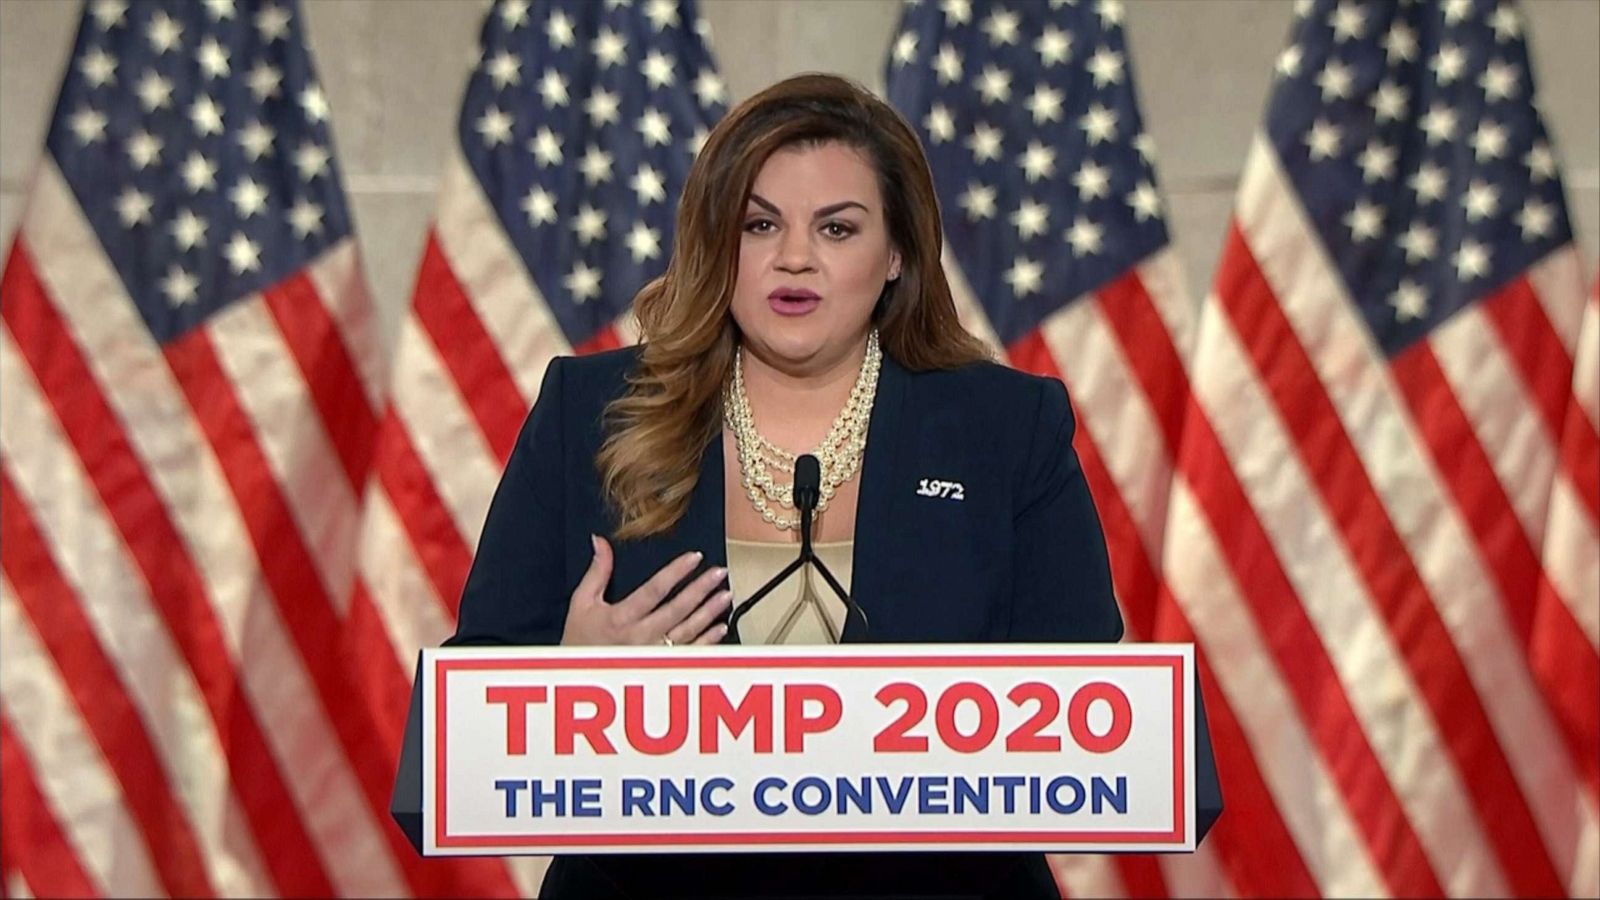 Abby Johnson Discusses Why She Left Planned Parenthood At The 2020 RNC